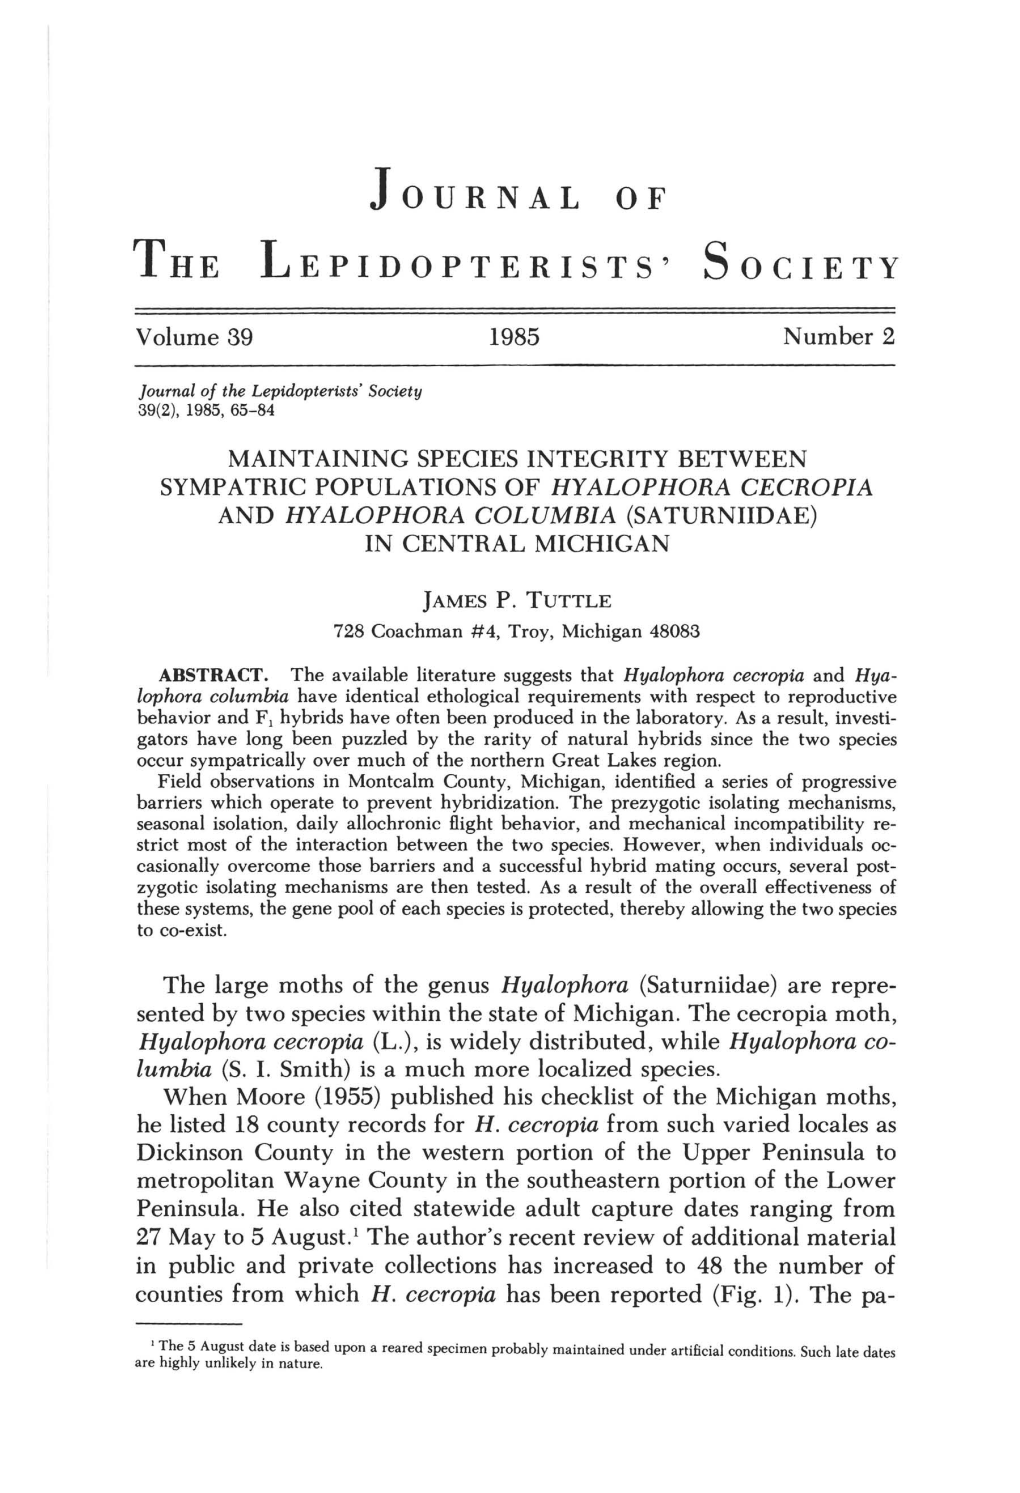 Journal of the Lepidopterists' Society 39(2), 1985, 65-84